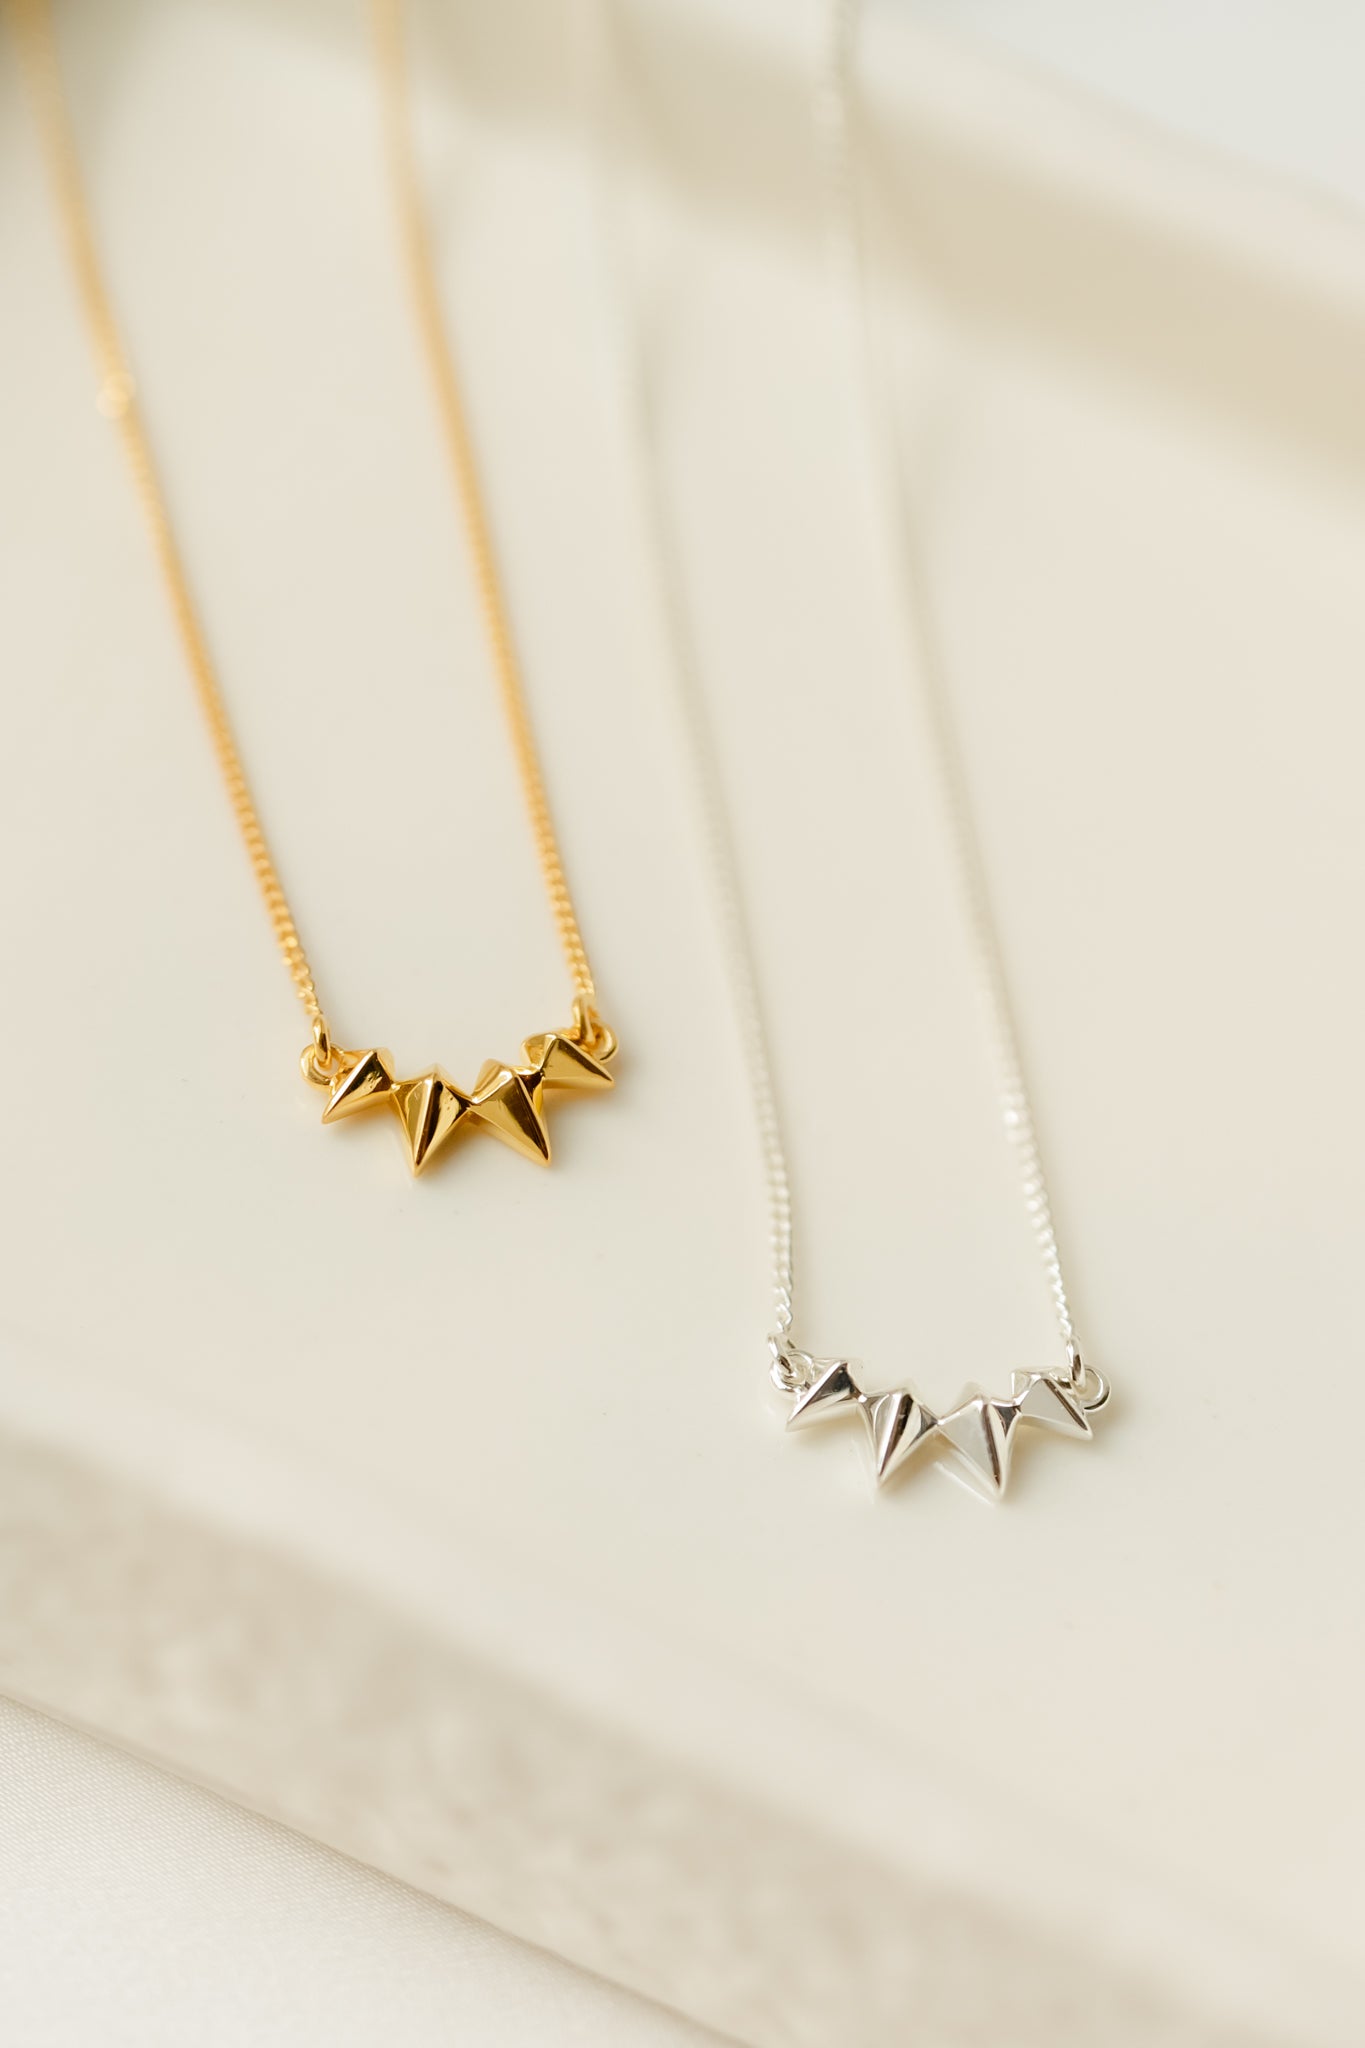 Gold necklace with small spikes and silver necklace with small spikes